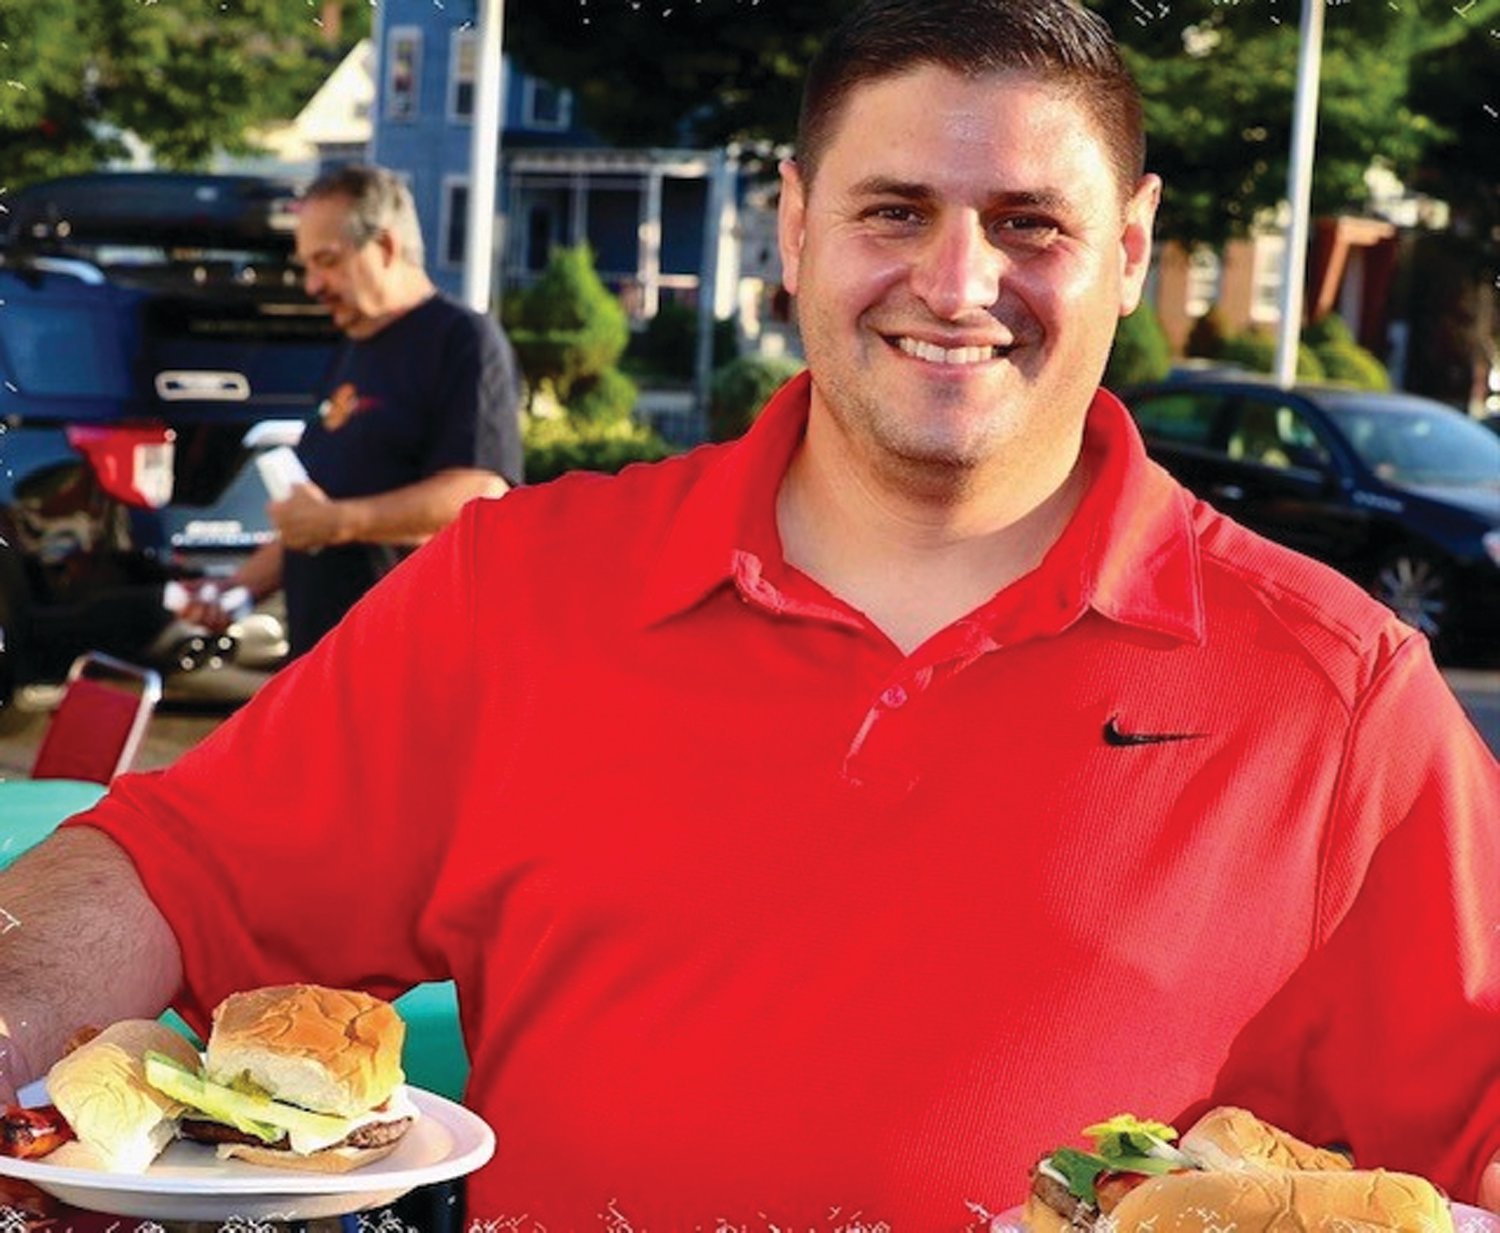 TASTY TREATS: Former Johnston Town Councilman Richard J. DelFino III shows off the cheeseburgers and hot dogs he and 150 people enjoyed last Friday night during the Italo-American Club’s cookout/clambake in Providence.